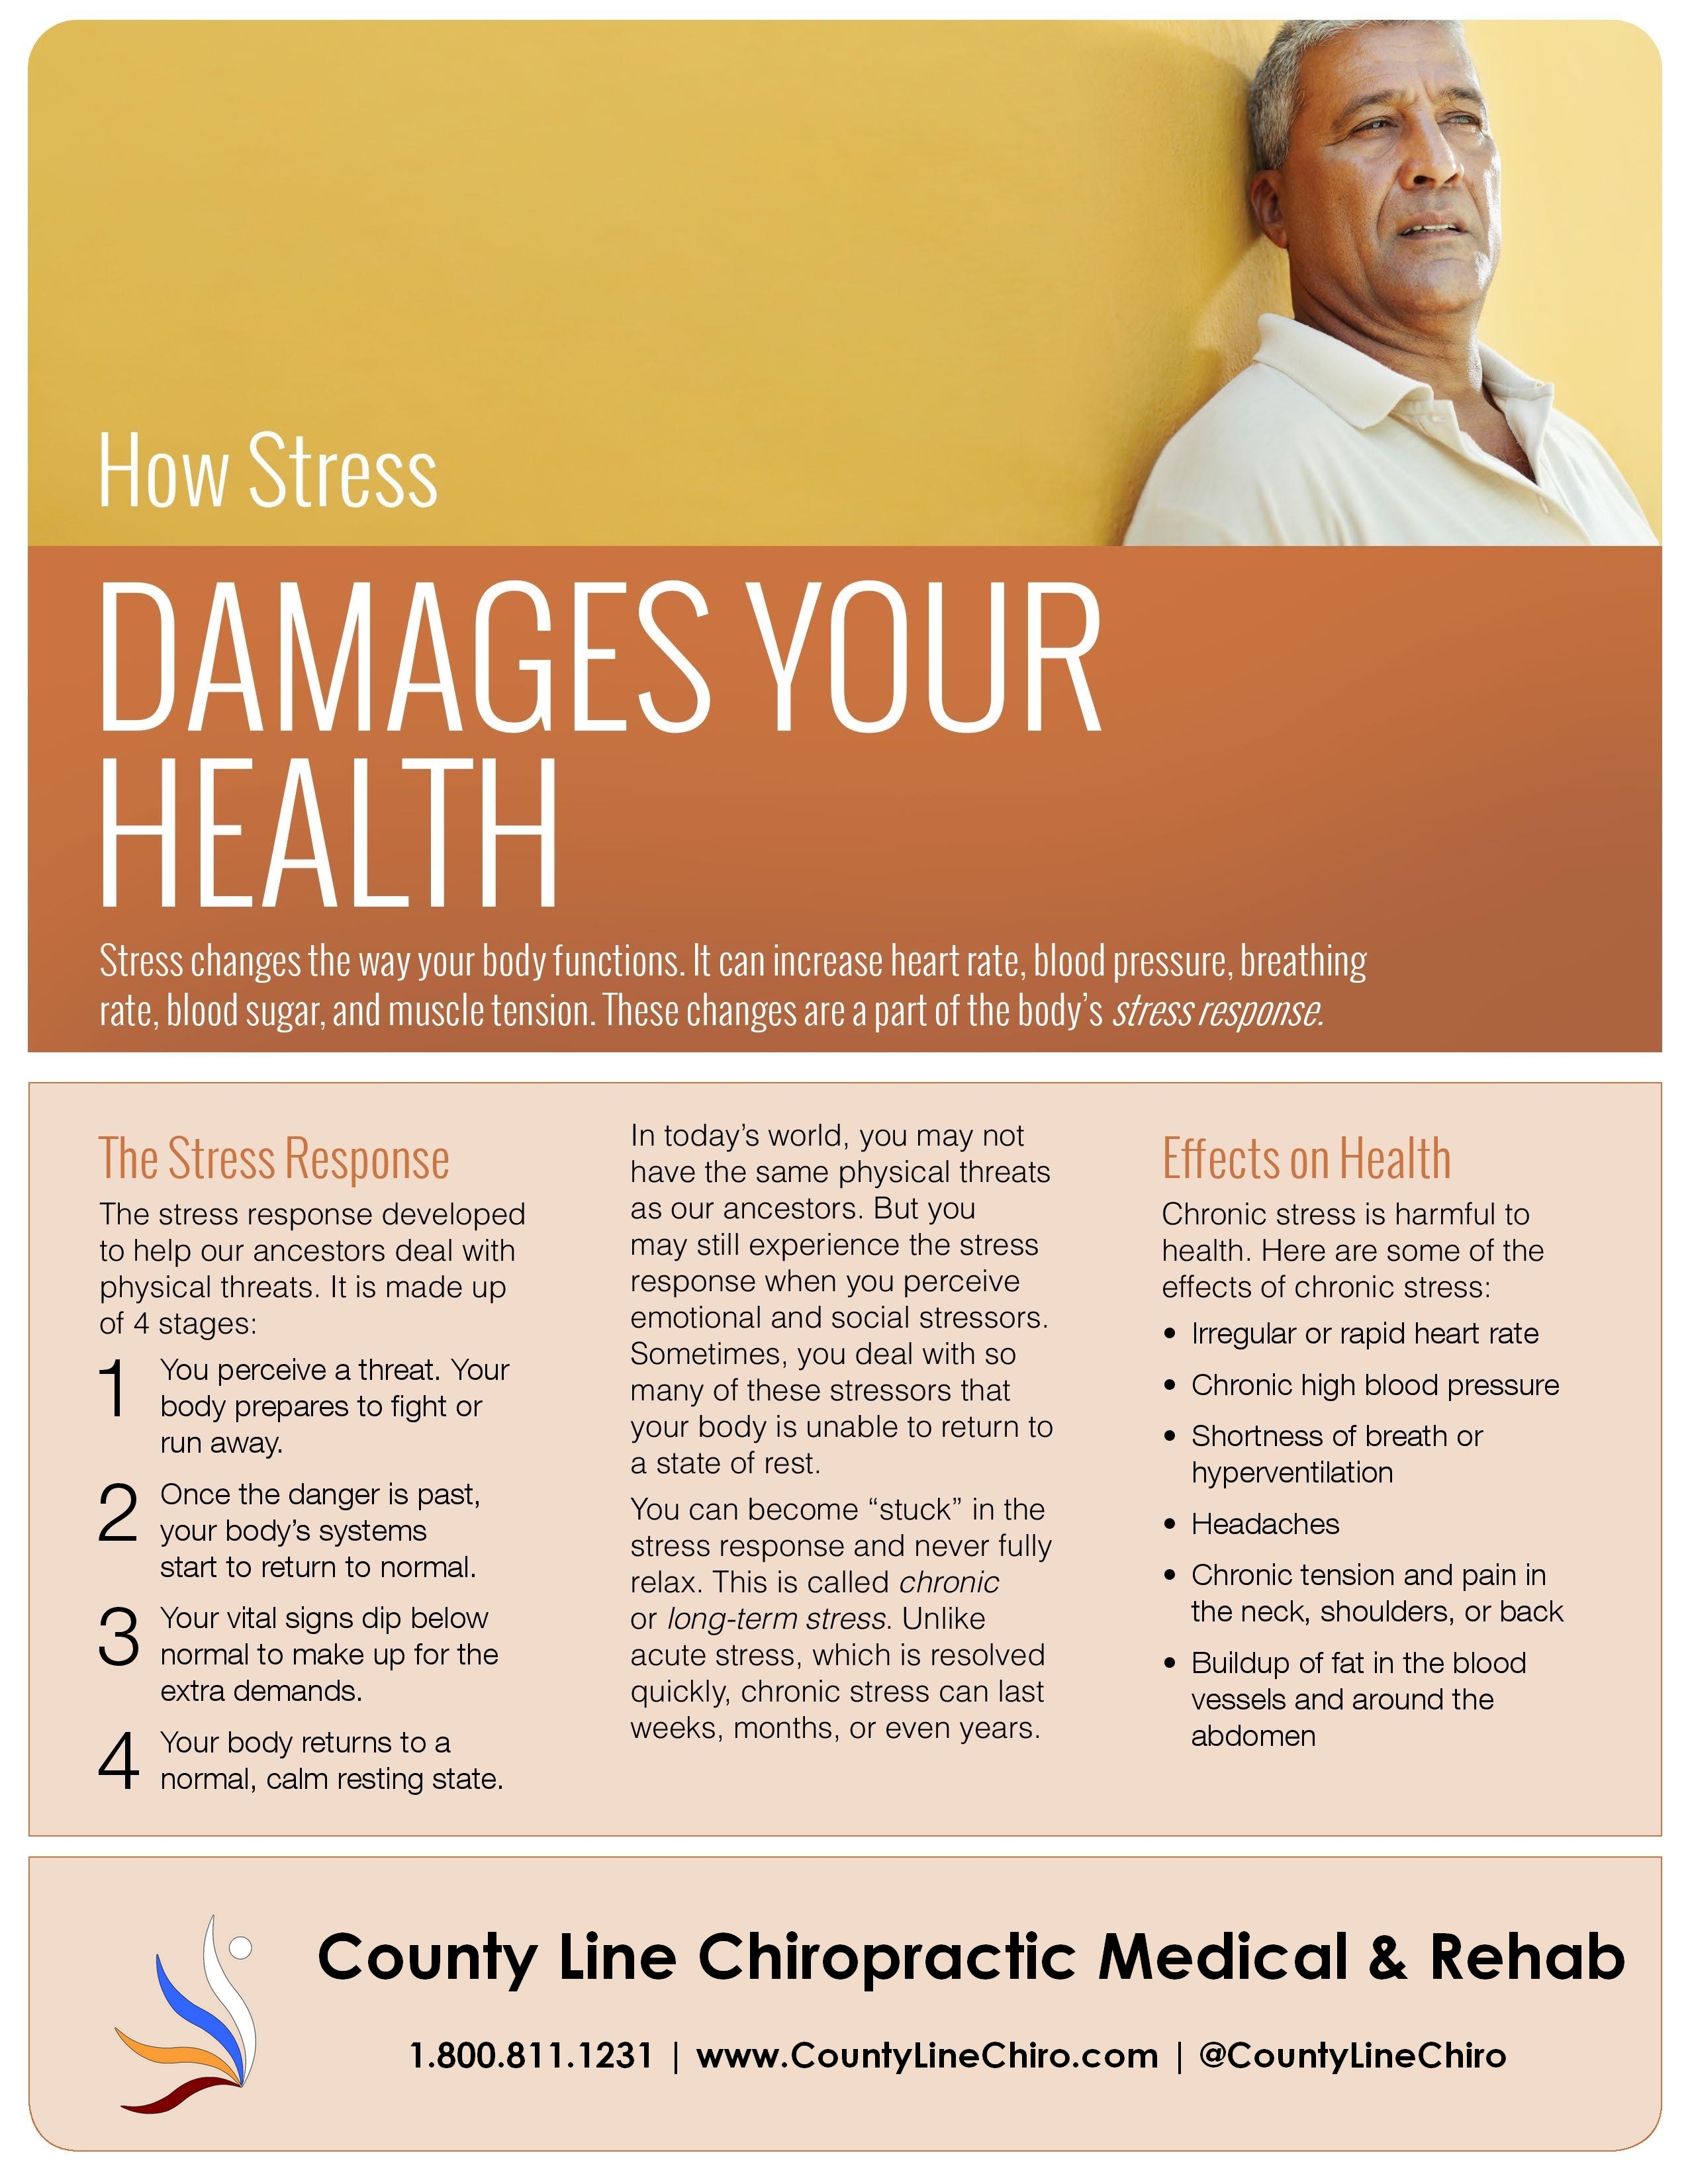 How Stress Damages Your Health